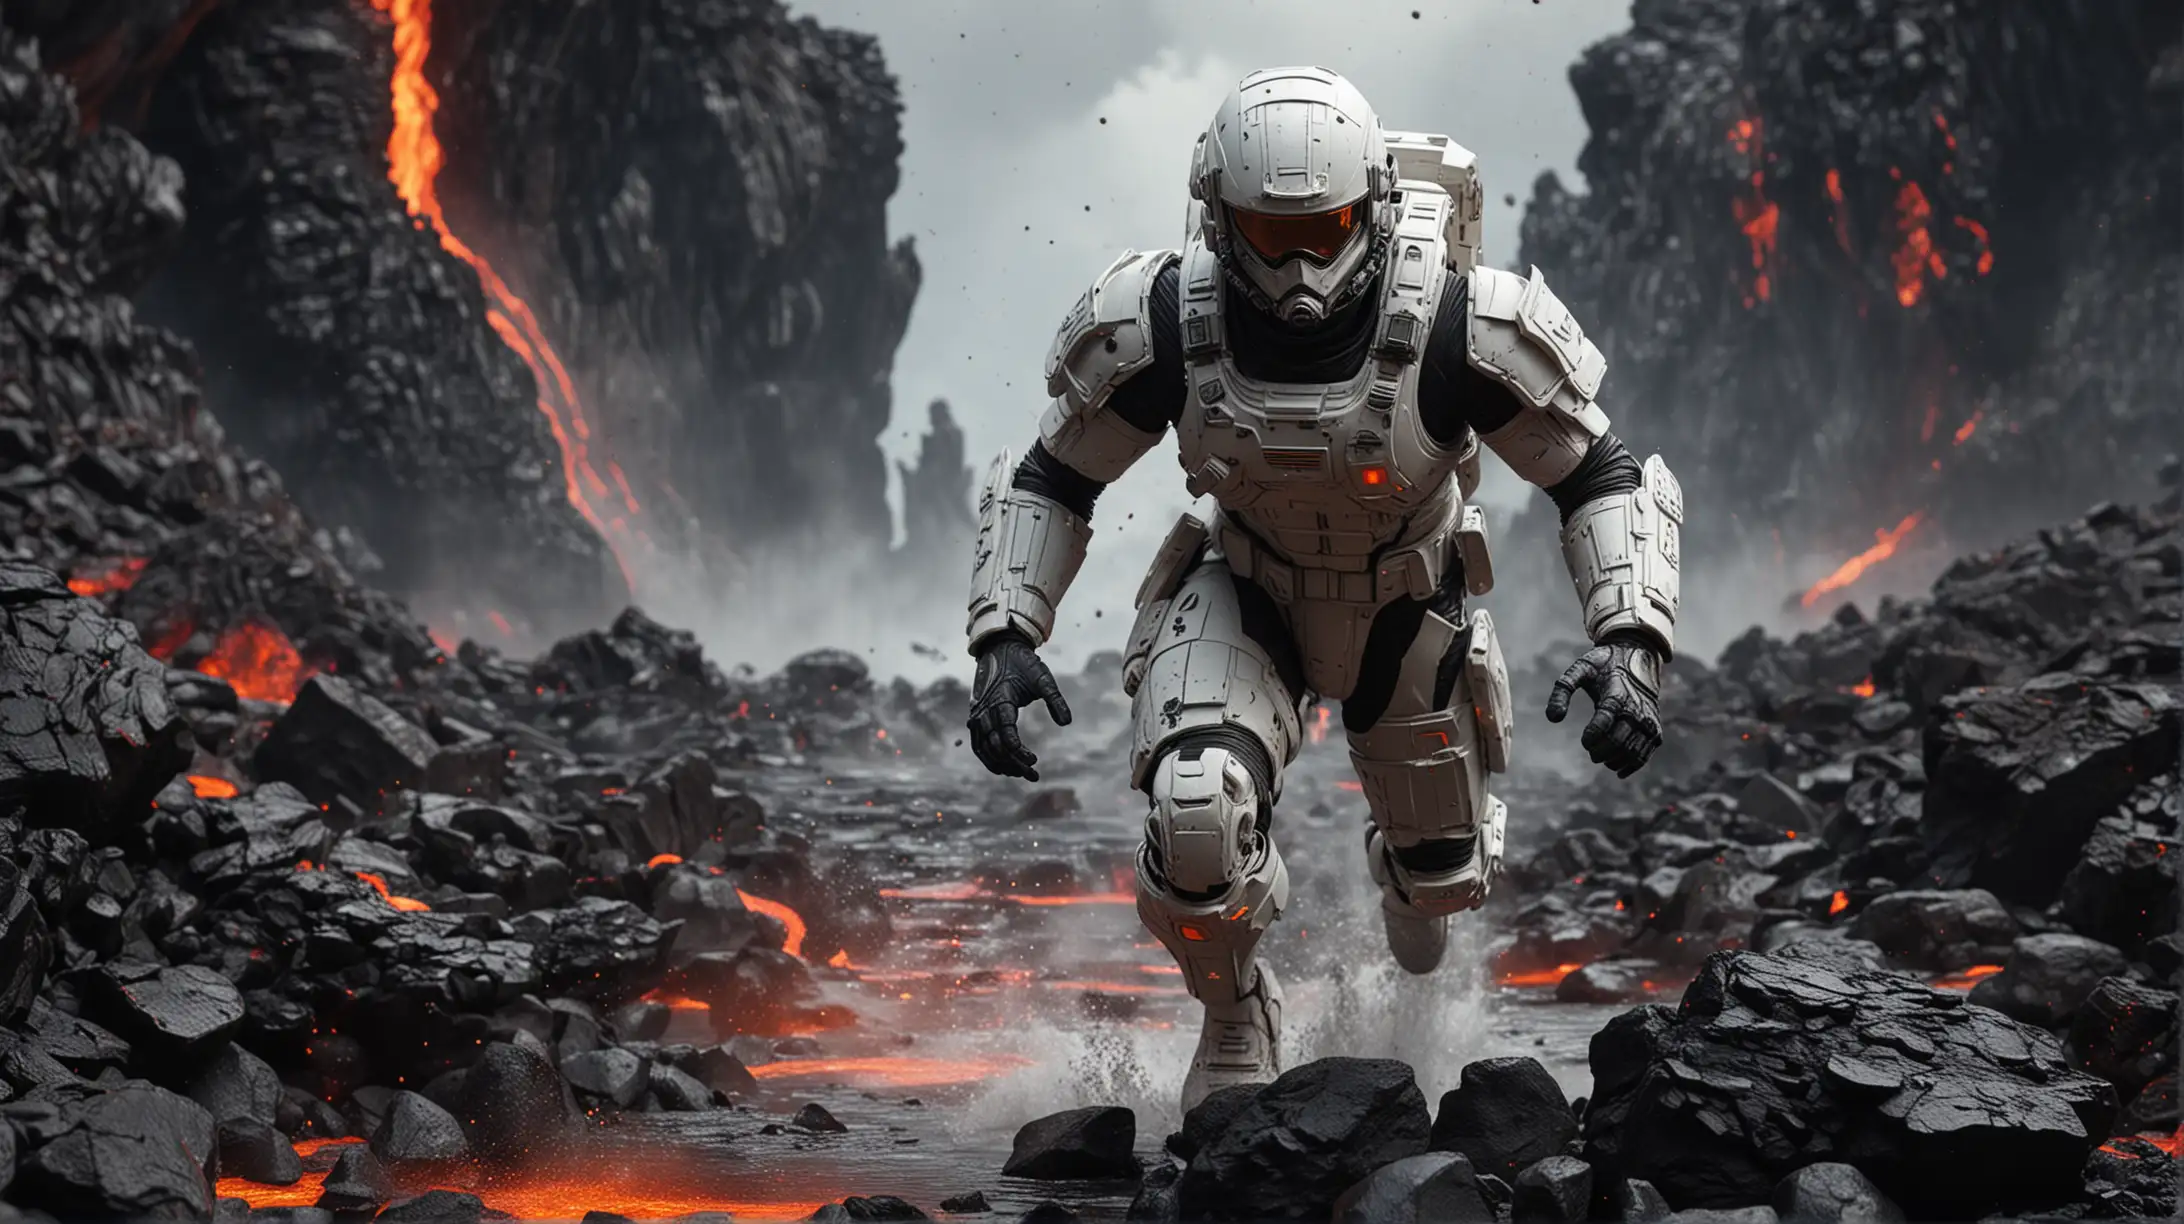 HyperRealistic Space Soldier Running Over Lava